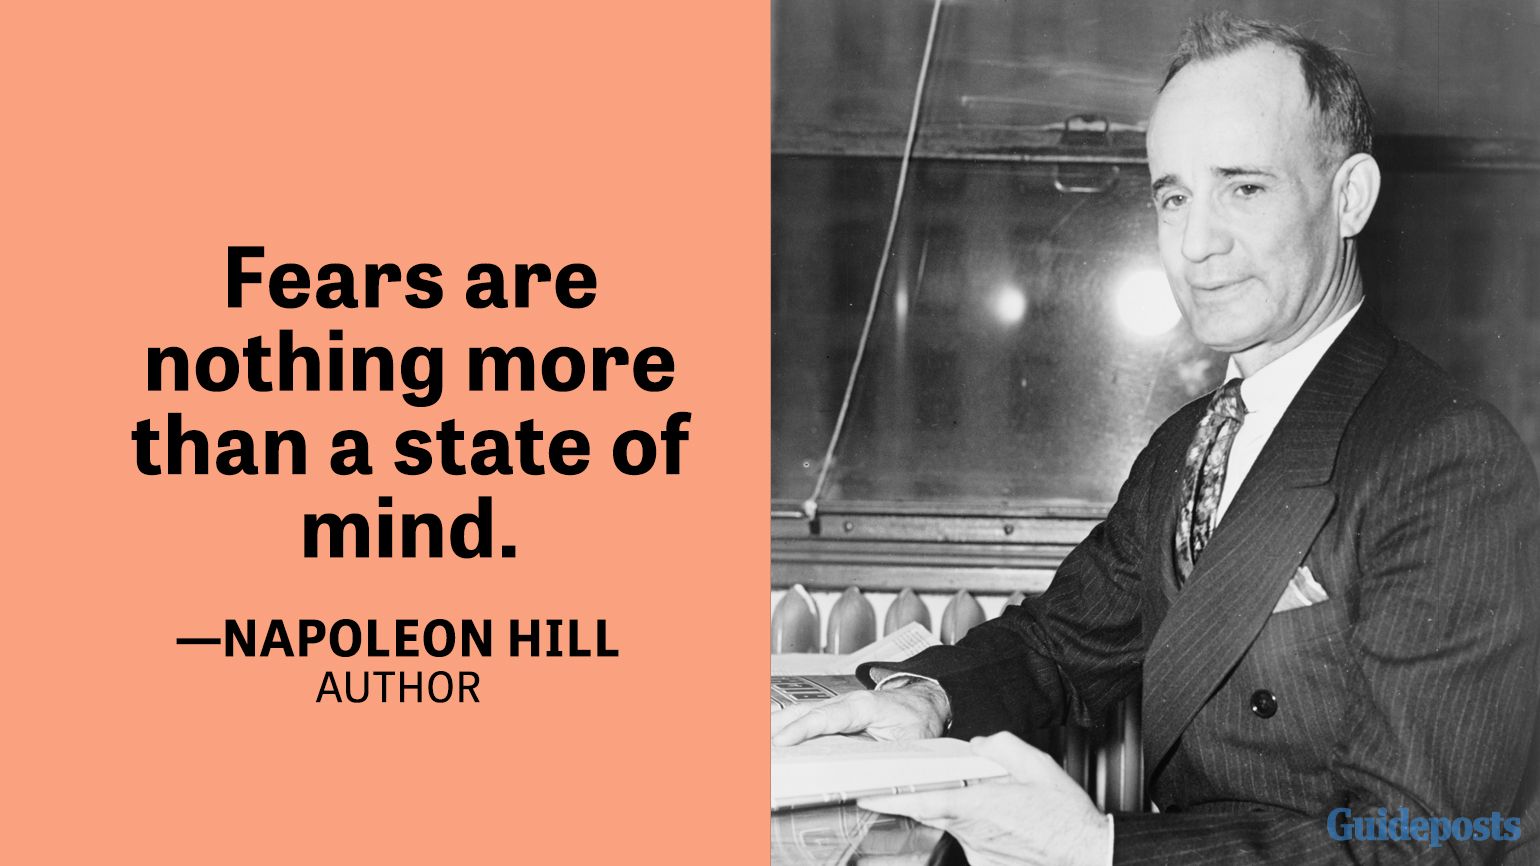 Fears are nothing more than a state of mind. —Napoleon Hill, Author 